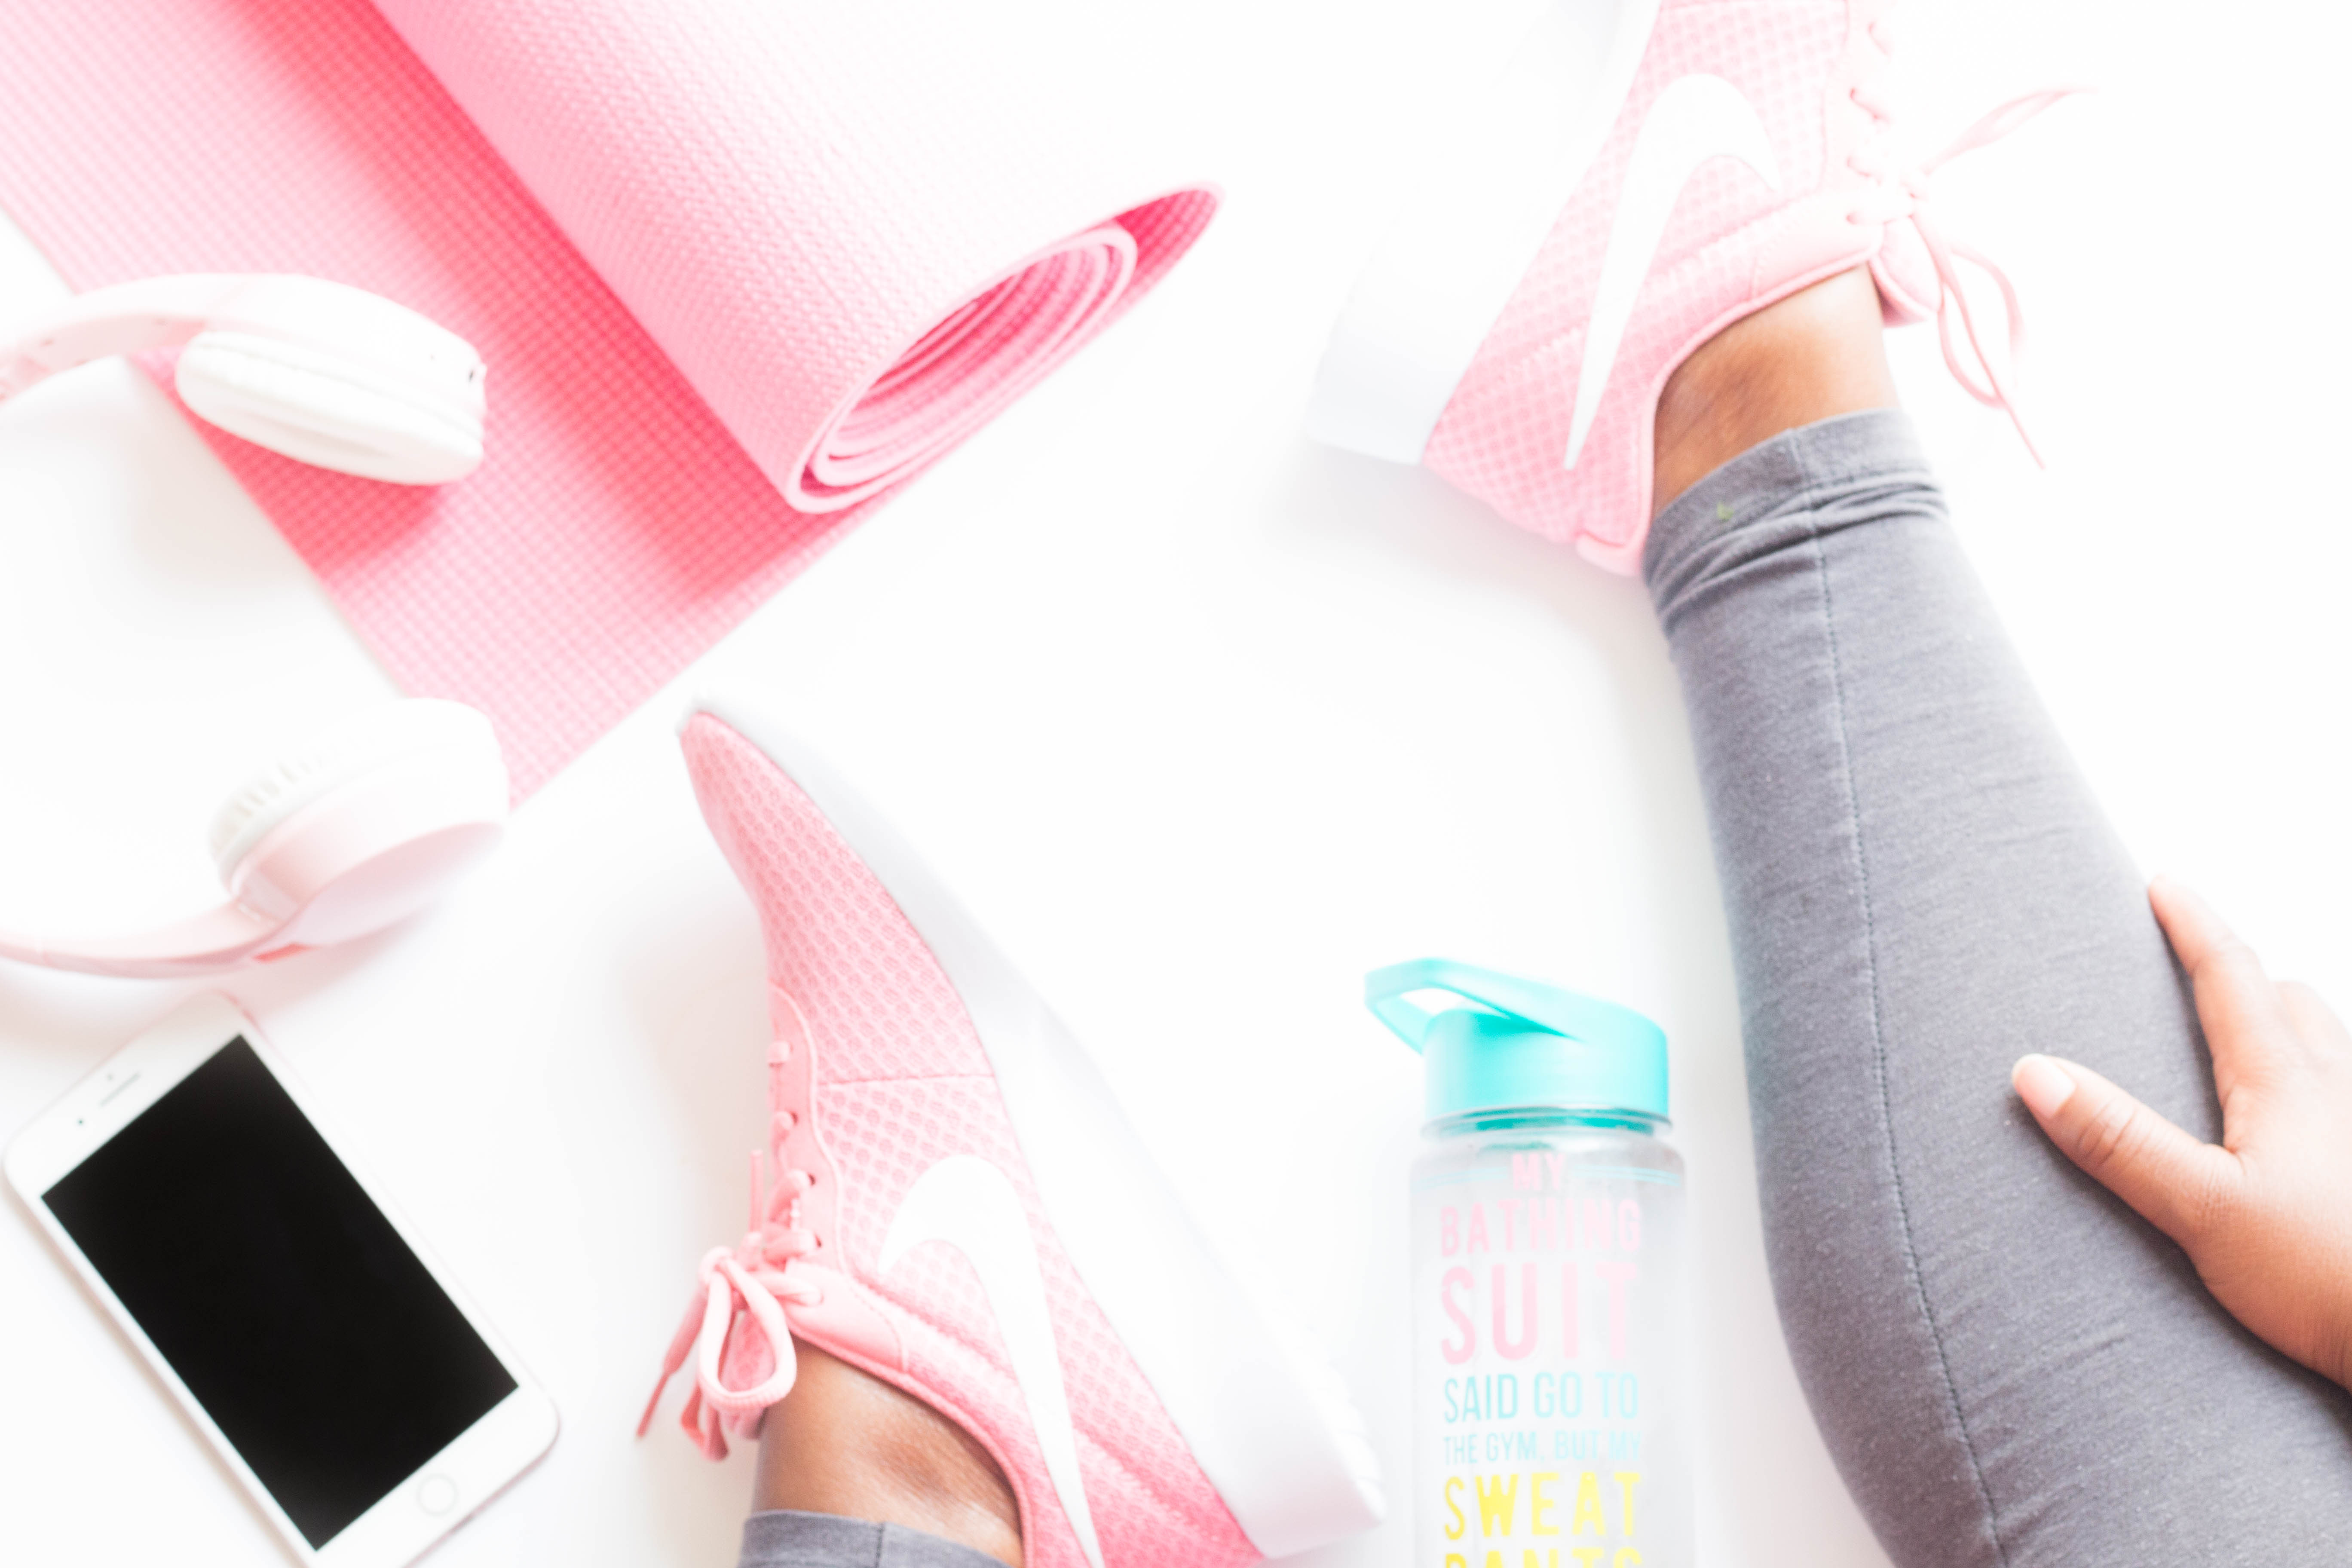 Flat lay with yoga mat, head phones, iphone, water bottle. Luara from Mom Connection helps help moms lose weight and talking about why moms have a hard time losing weight.